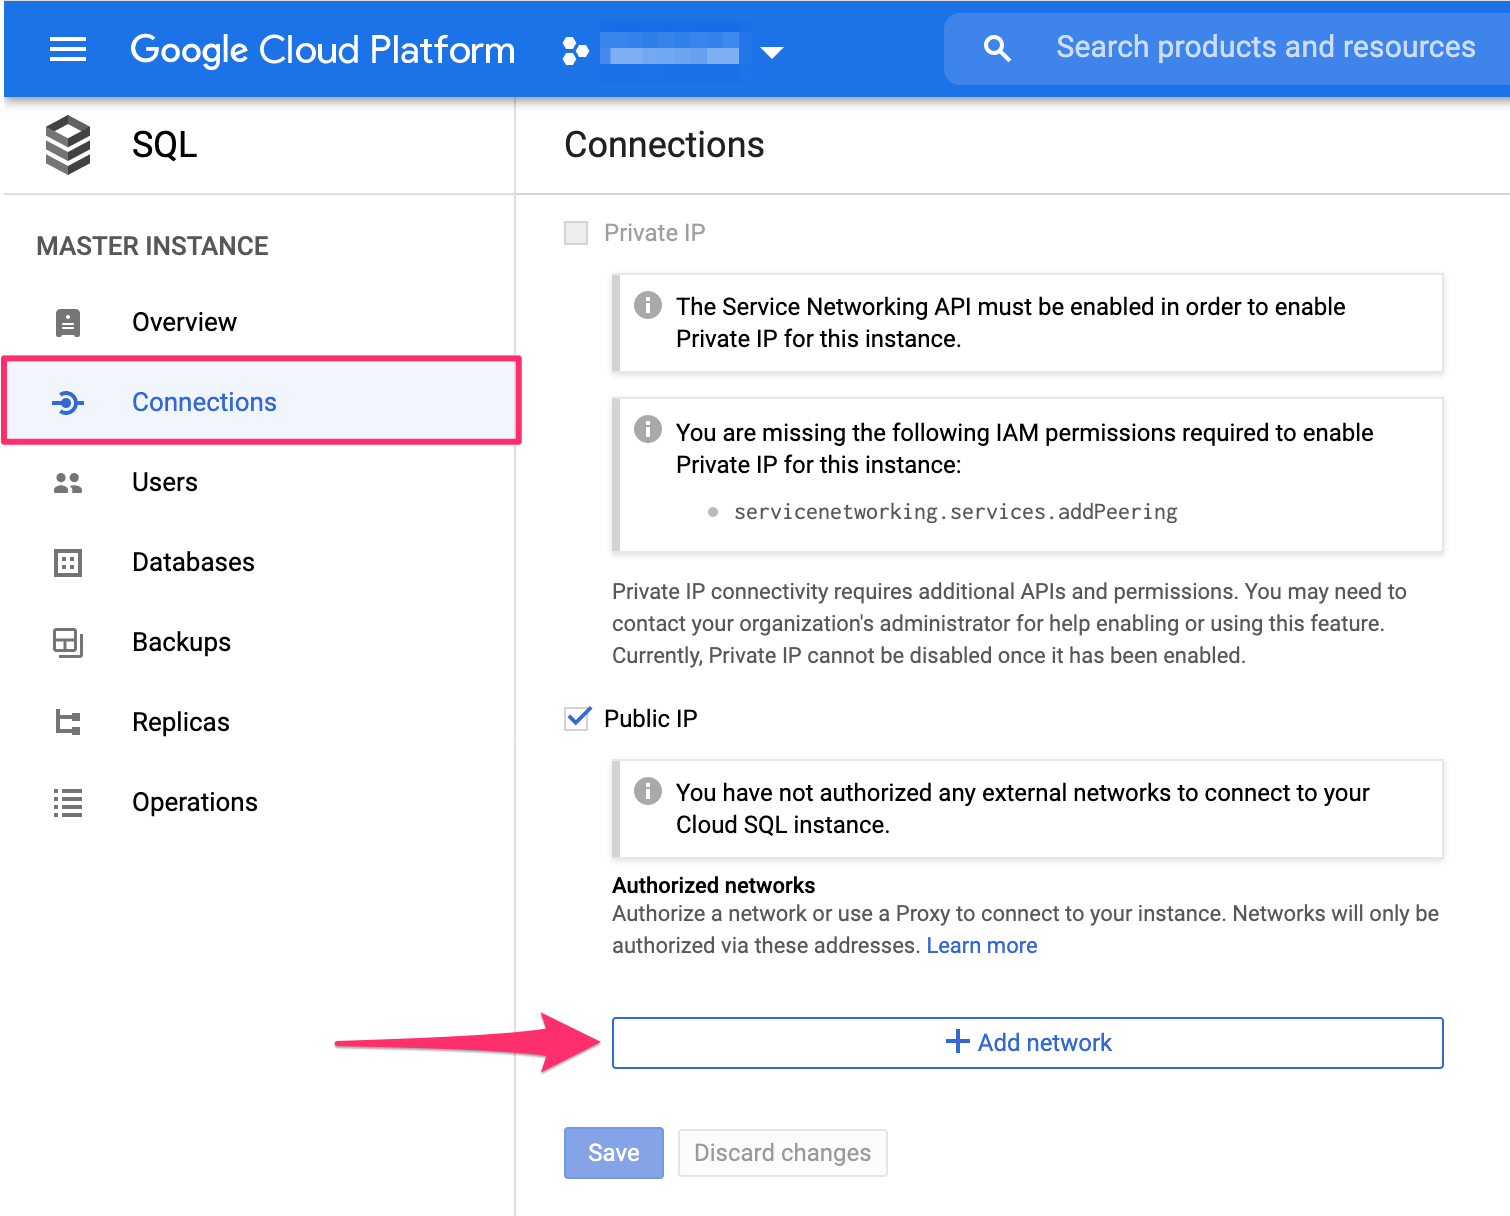 Navigate to connections in GCP